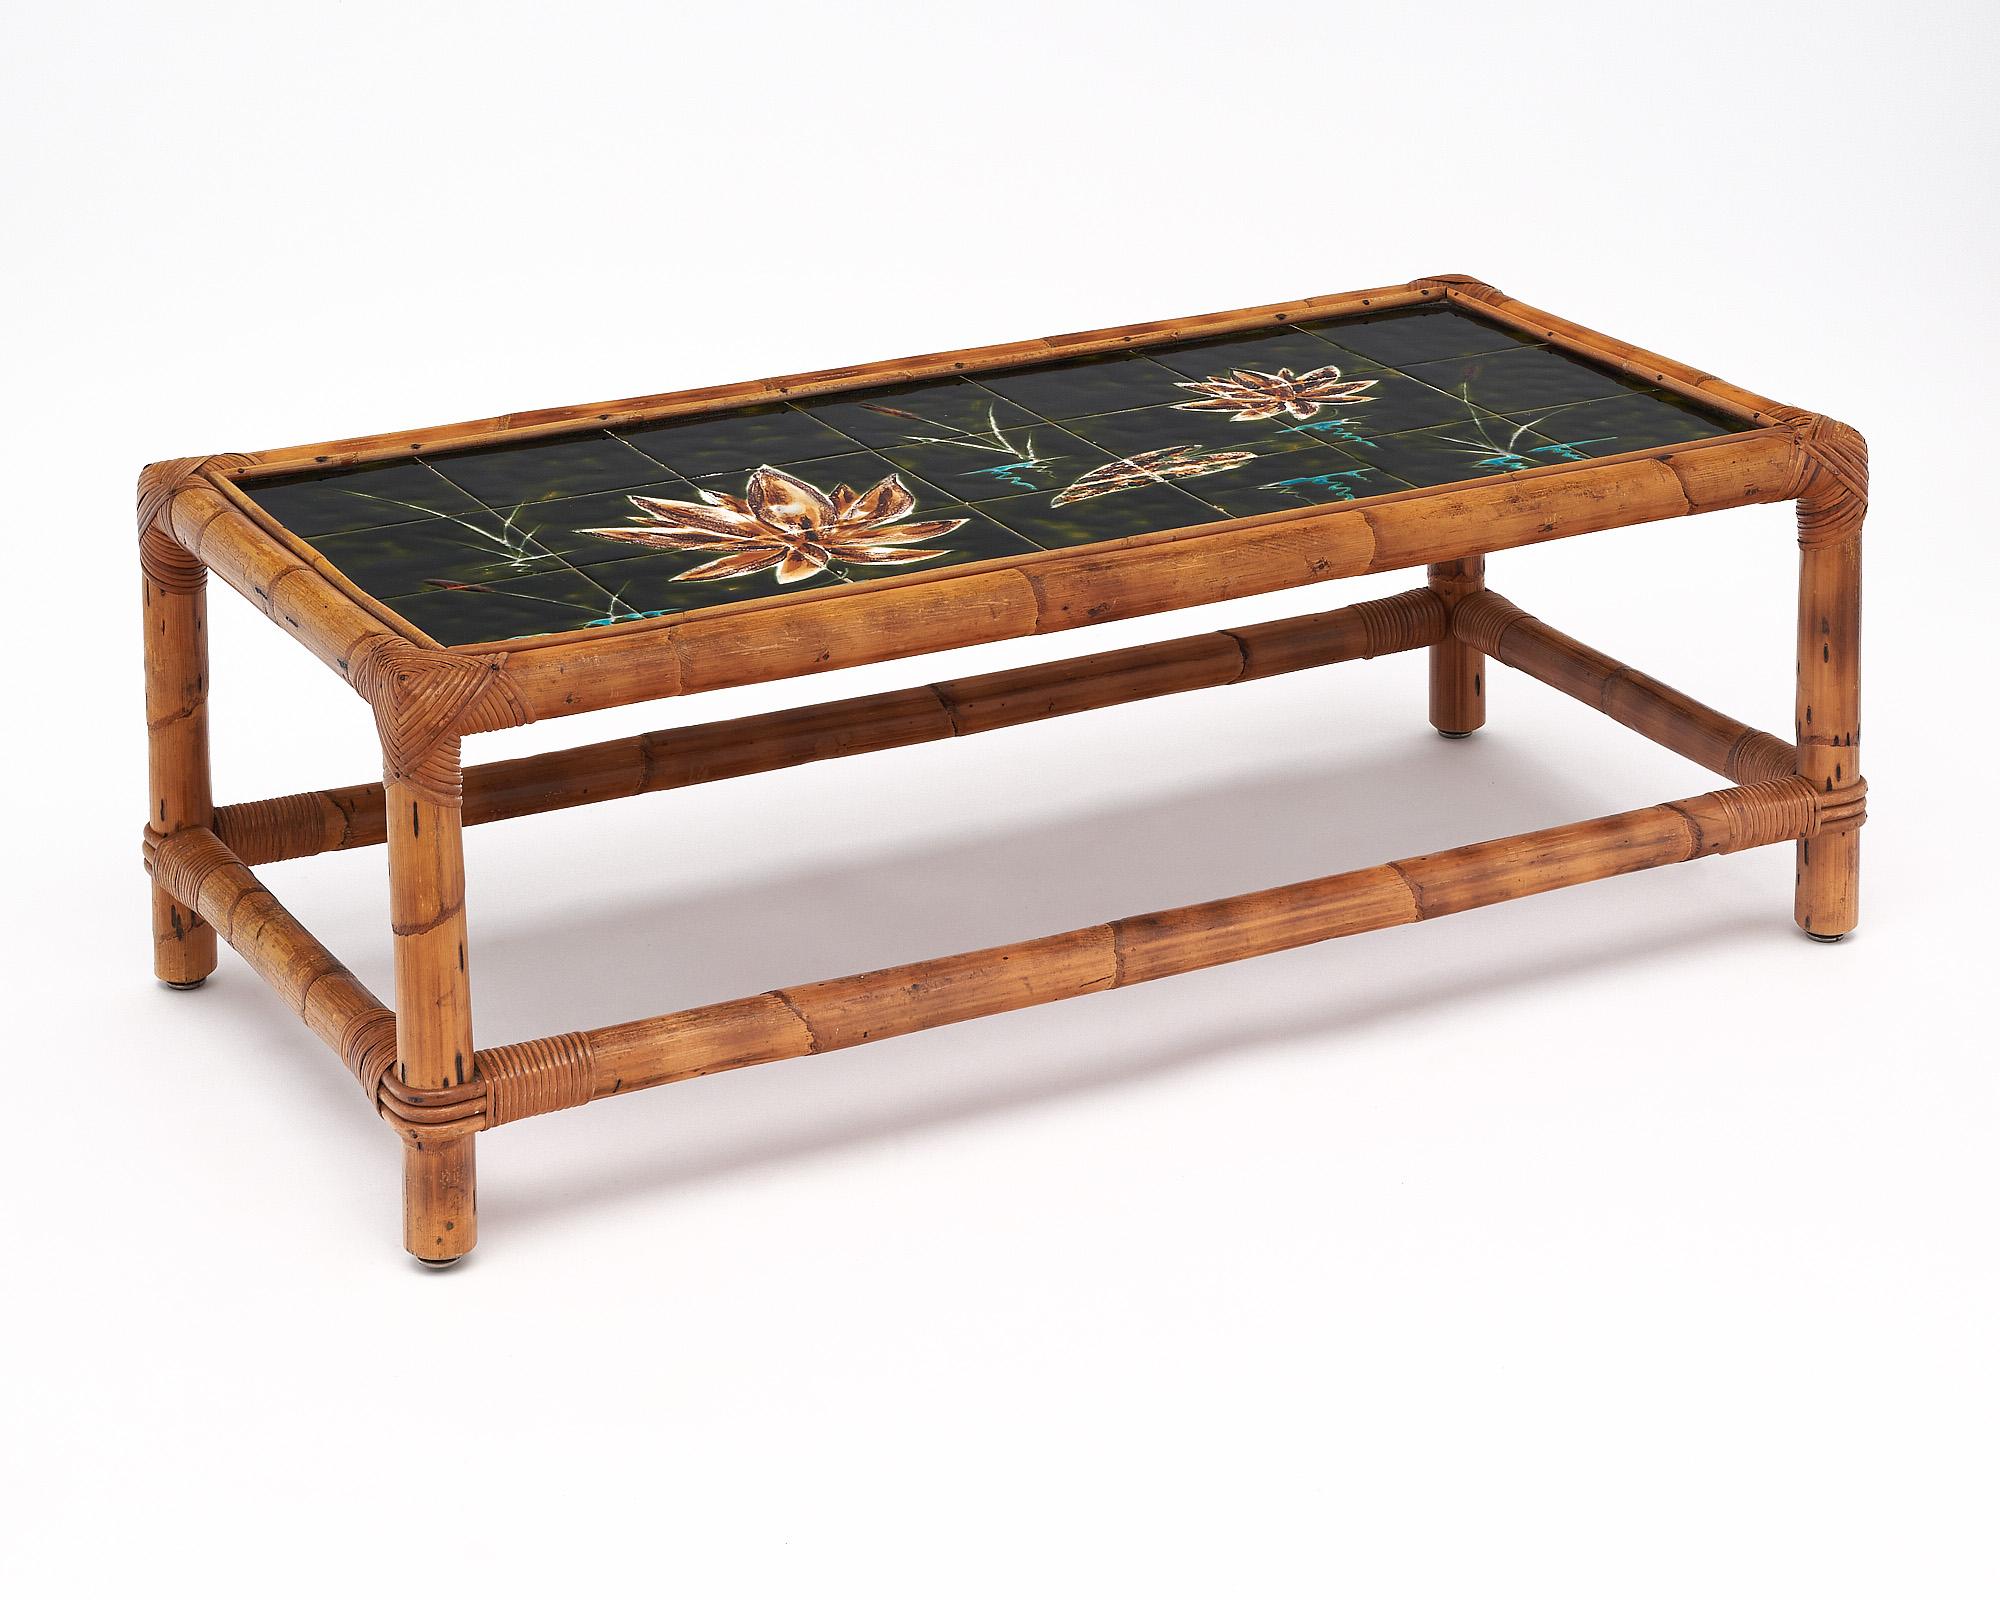 Coffee table from mid-century France. The structure is made of bamboo, while the top is tiled with tiles from Vallauris. The tiles showcase a hand-painted design of lilies.
